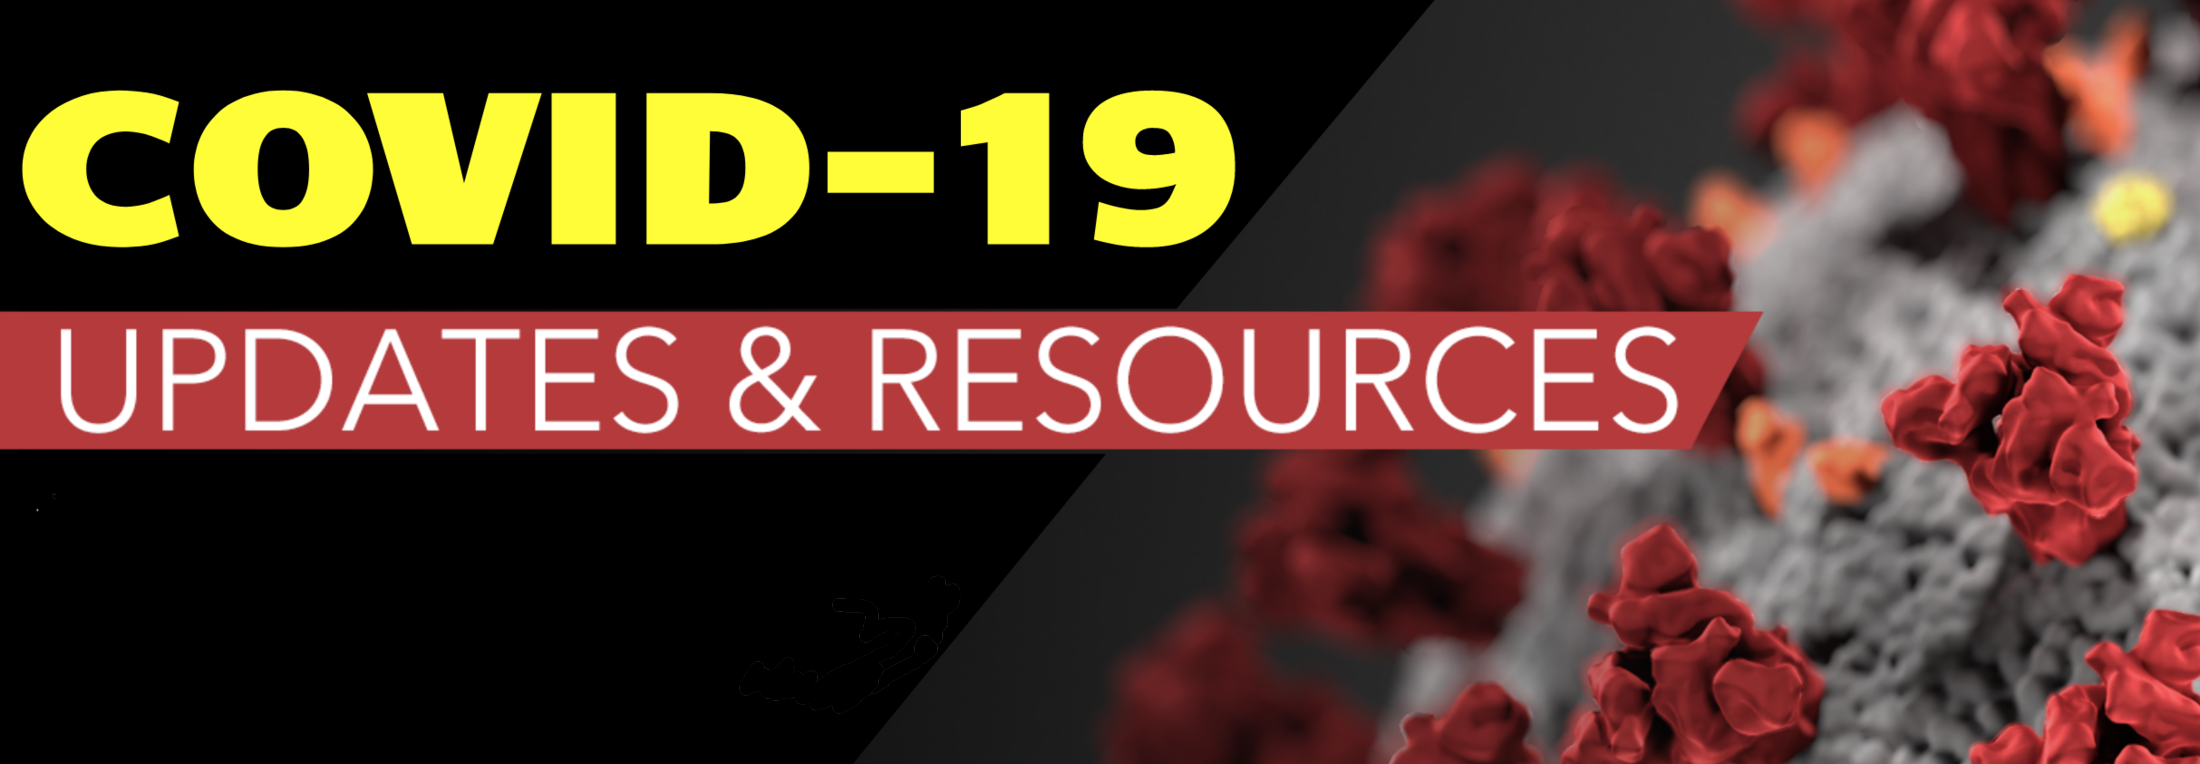 Covid 19 updates and resources logo